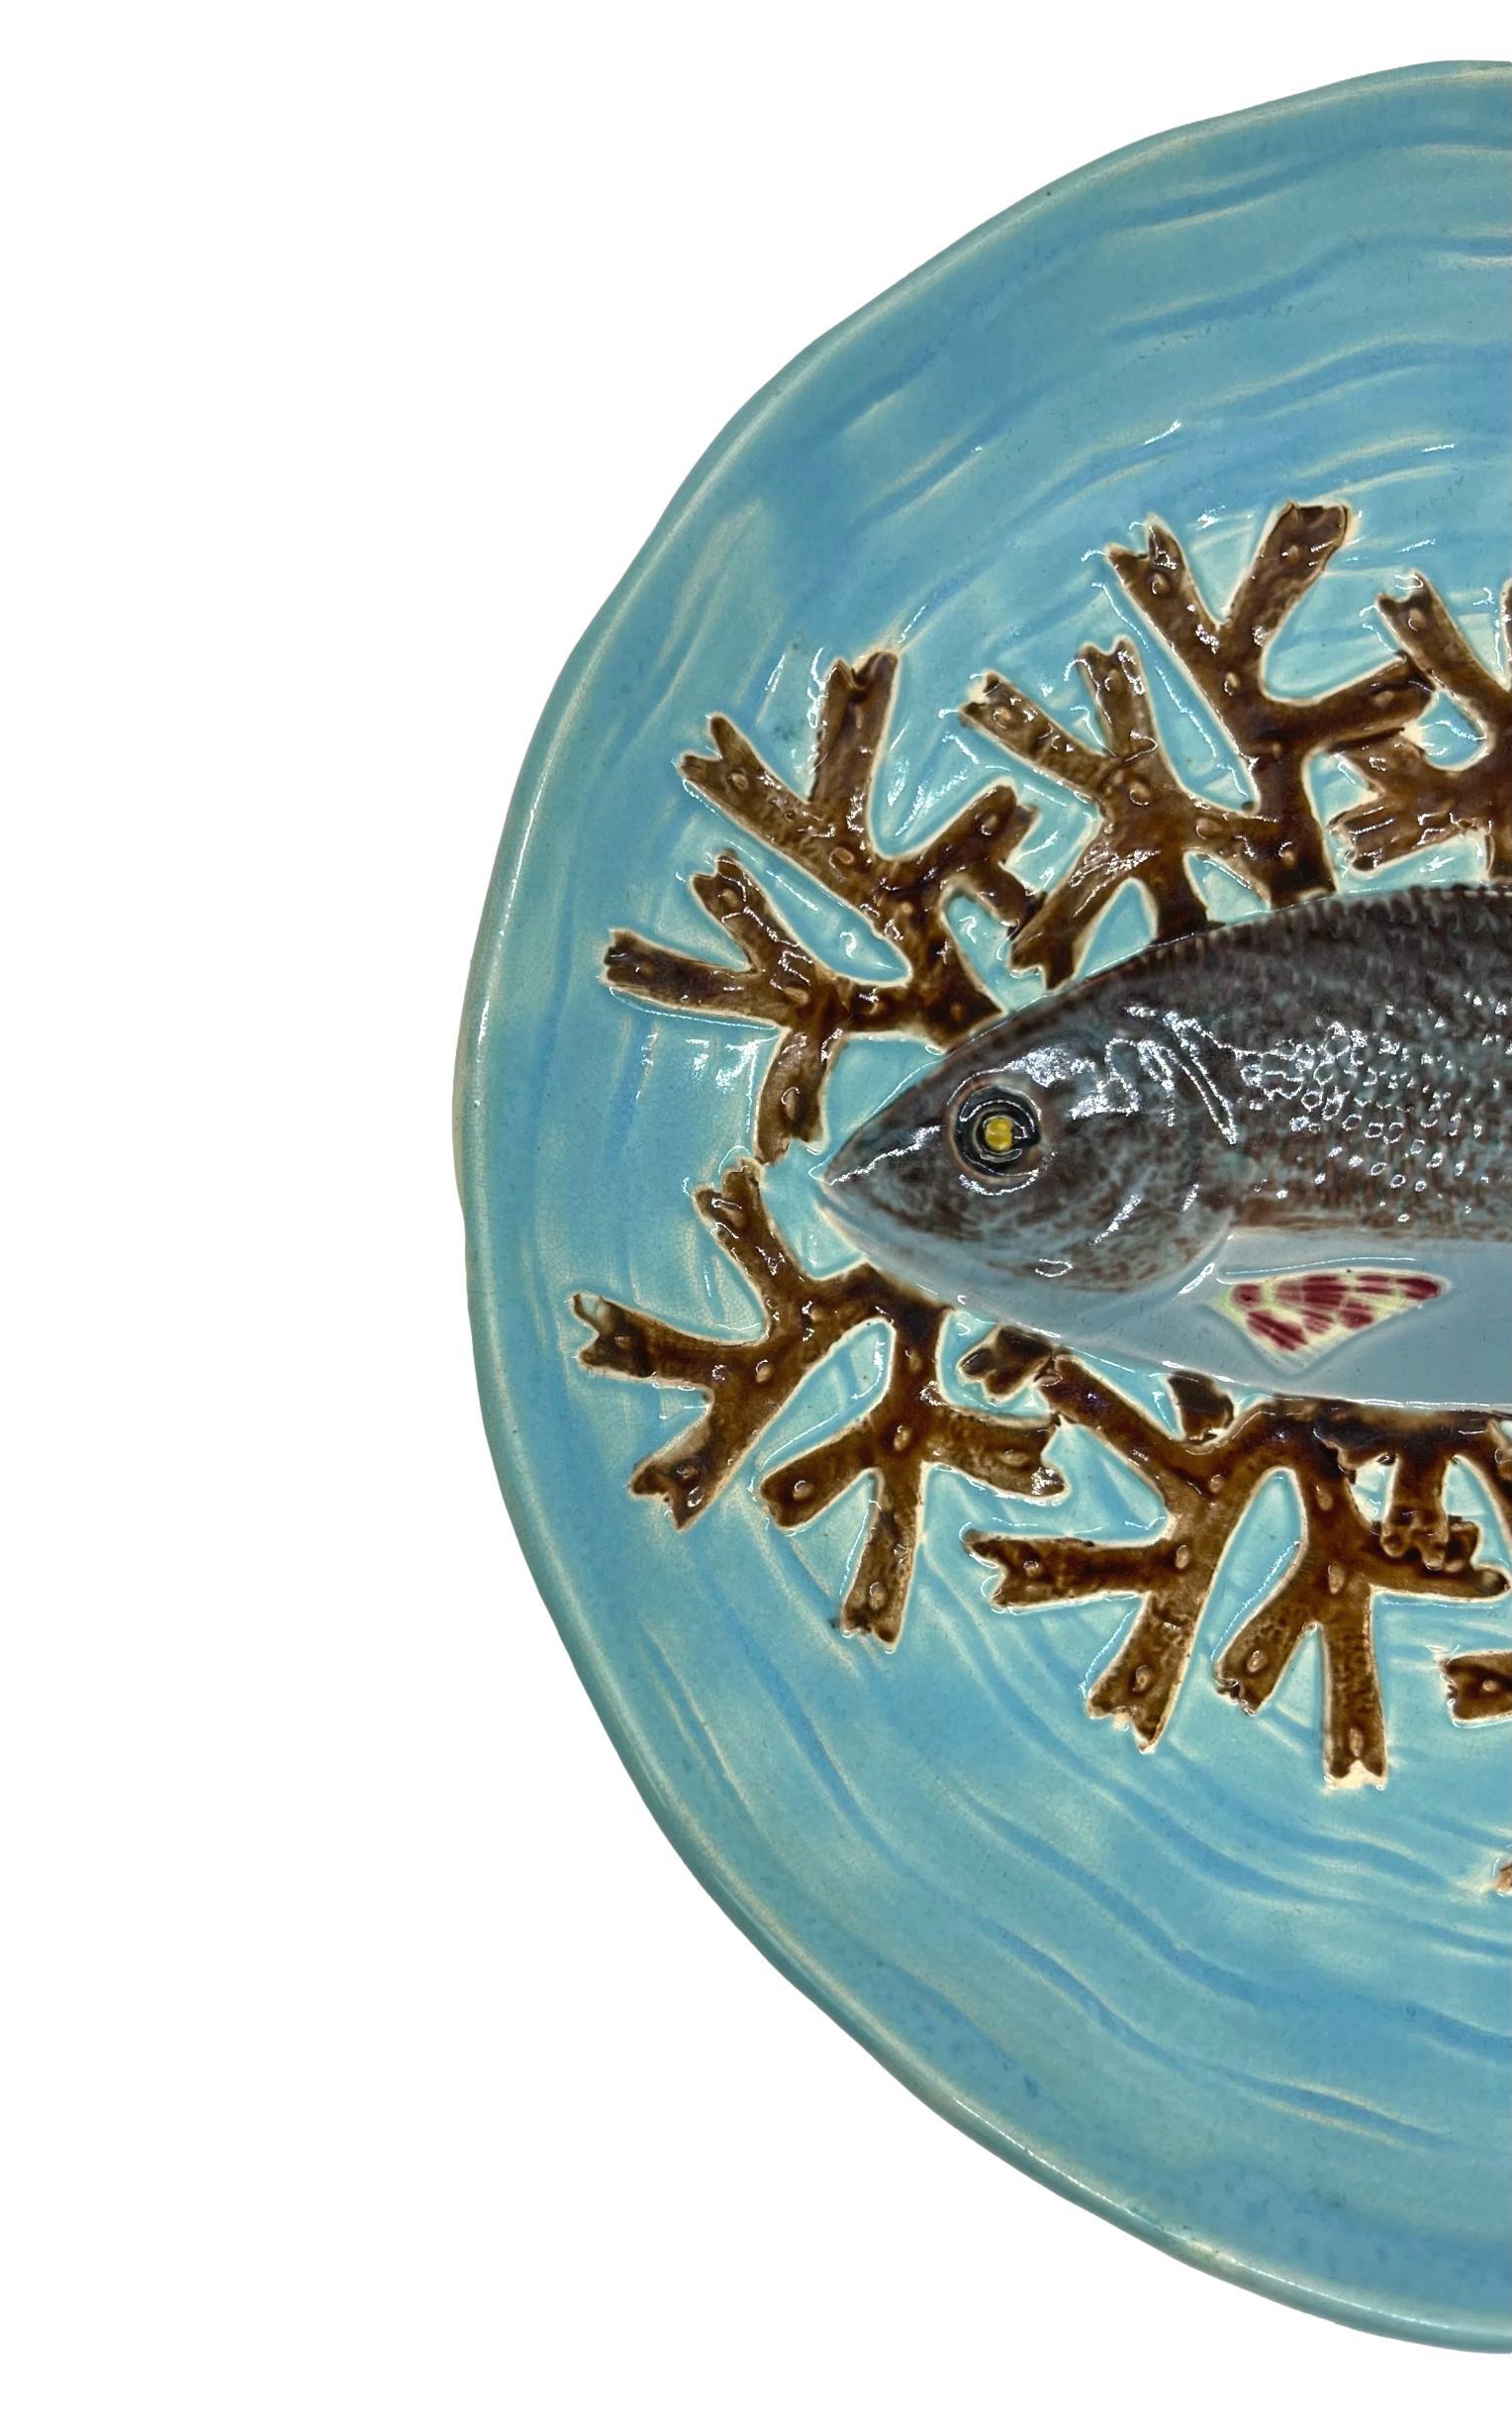 Joseph Holdcroft Majolica Trompe L'oeil salmon plate, naturalistically molded with a life-like salmon on a bed of red seaweed, on a relief molded basket-weave turquoise ground; the reverse with impressed mark,
'J HOLDCROFT.' 
For 30 years, we have